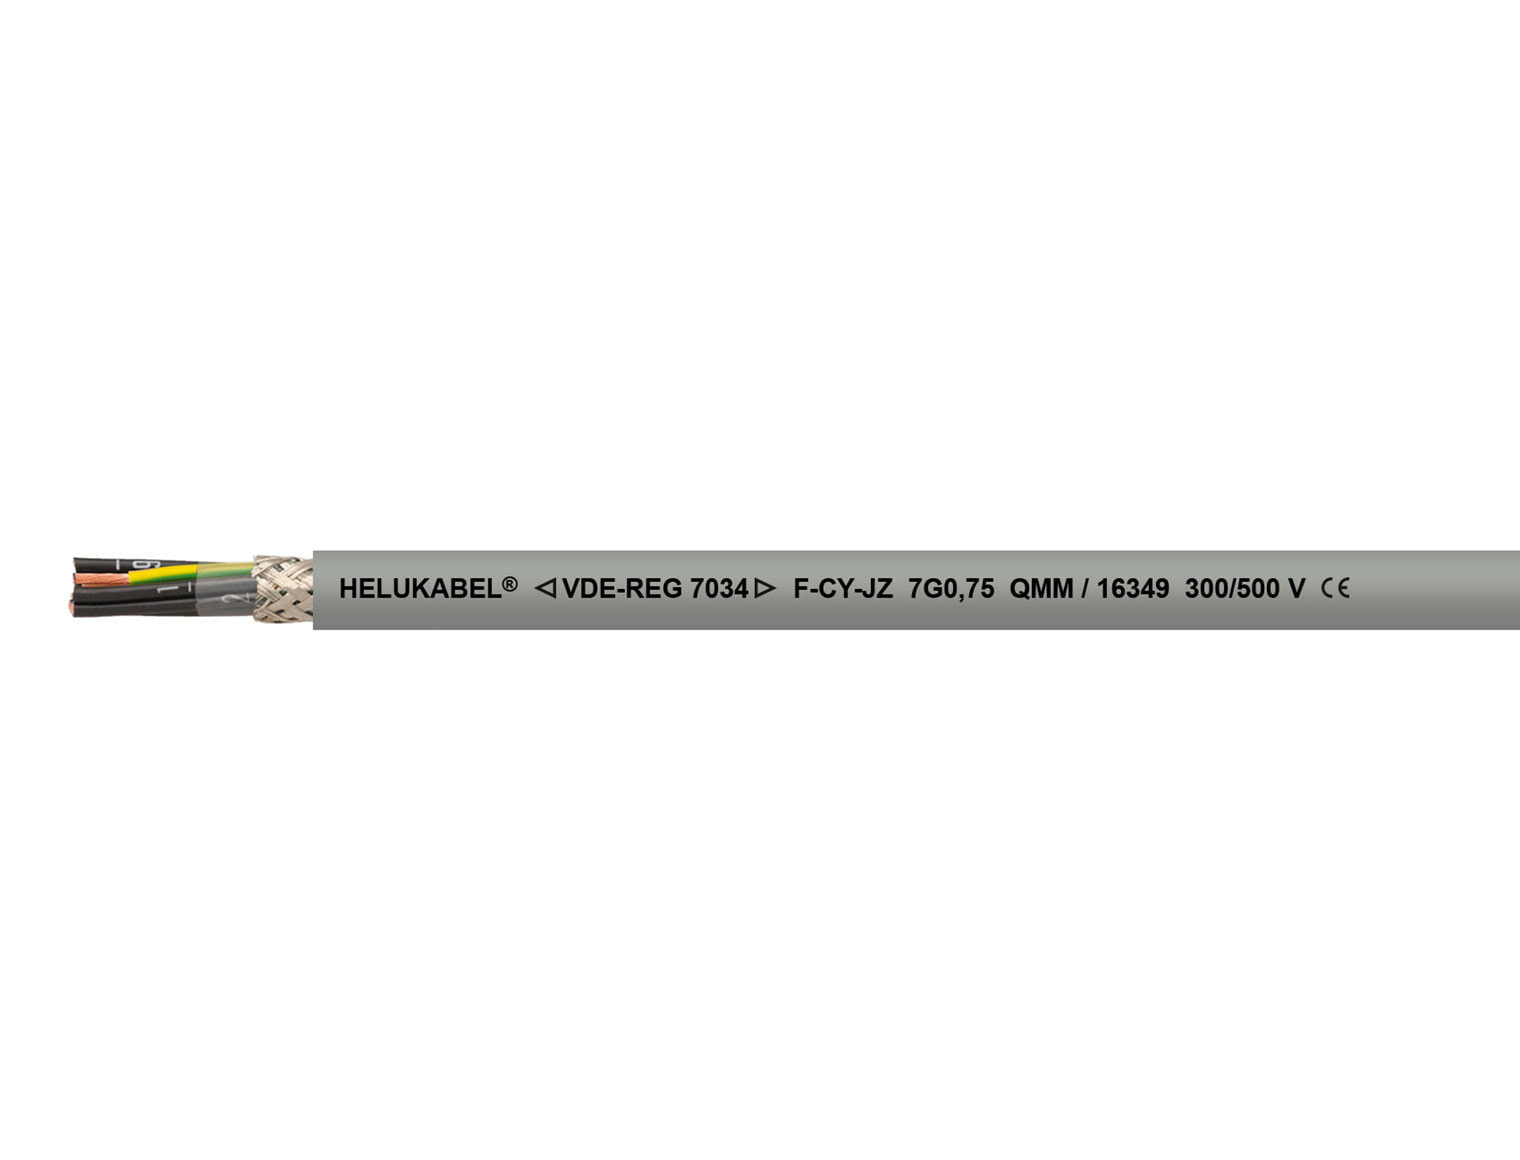 Helukabel HELU F-CY-JZ 4G0,5 16322 - Low voltage cable - Grey - Polyvinyl chloride (PVC) - Polyvinyl chloride (PVC) - Cooper - -10 - 80 °C